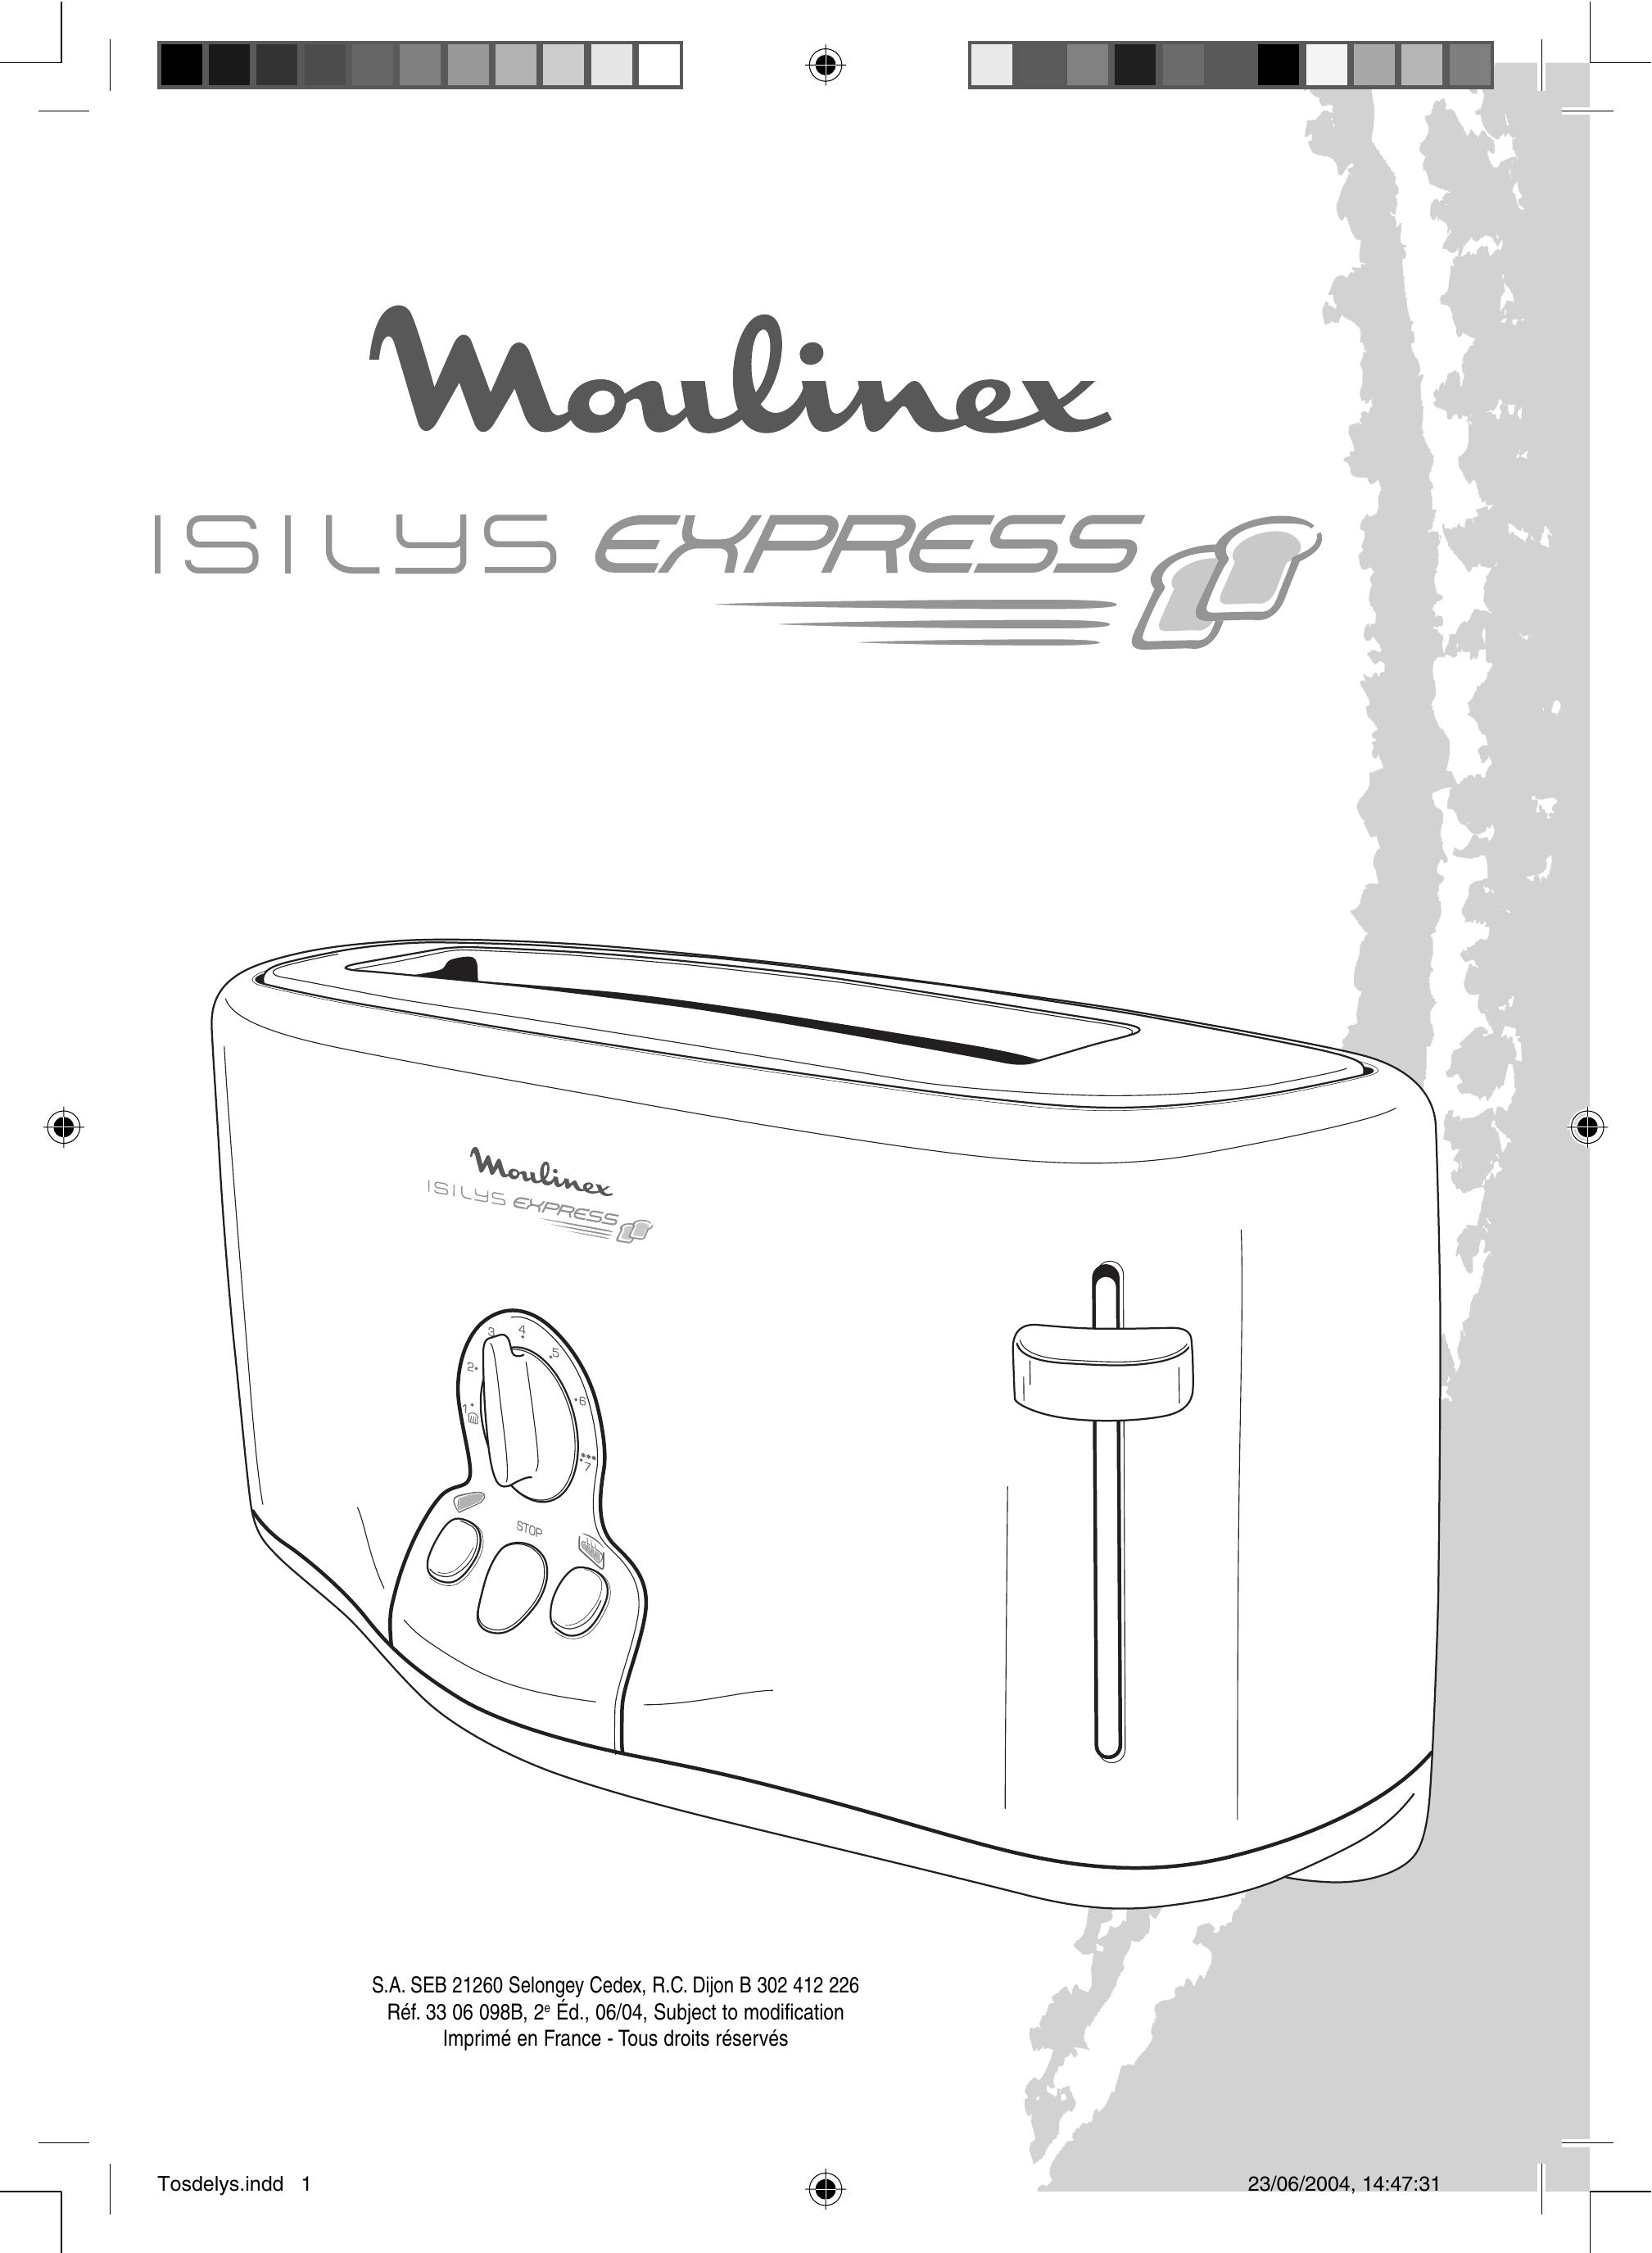 Moulinex Isilys Express Toaster User Manual